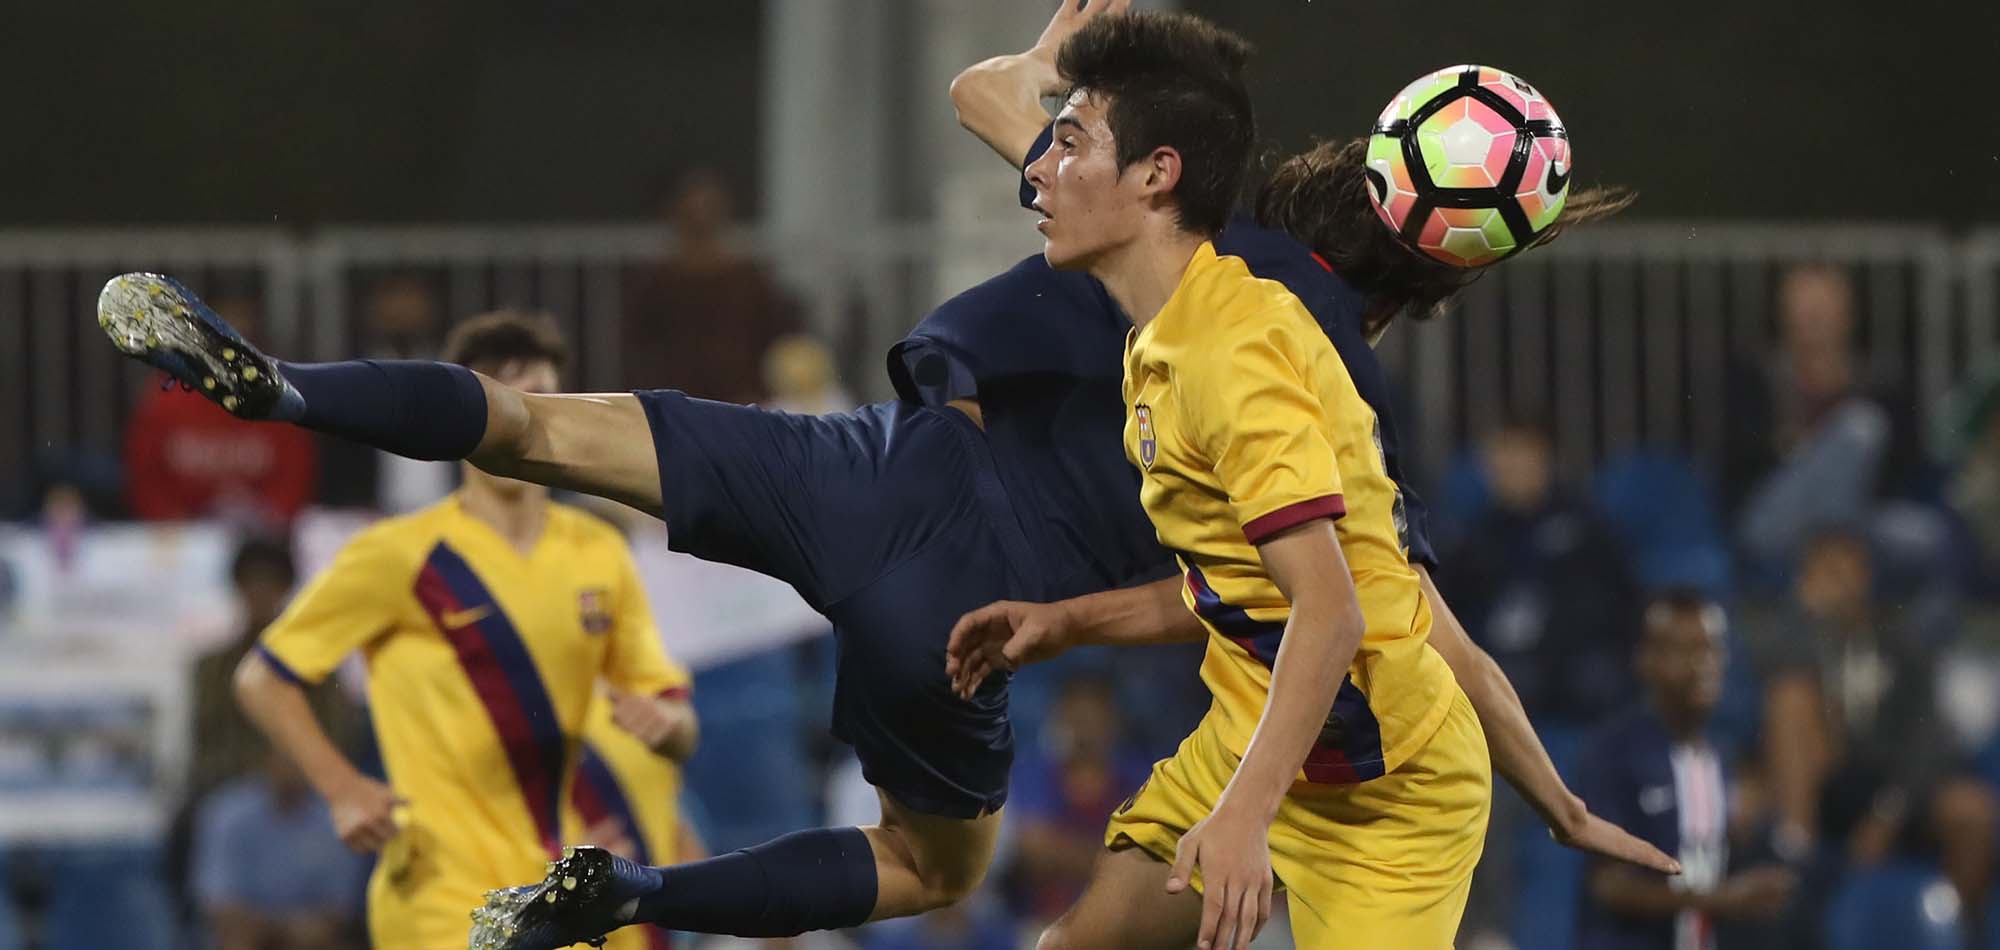 PSG HOLD BARCELONA TO SEND THEM CRASHING OUT OF THE AL KASS INTERNATIONAL CUP